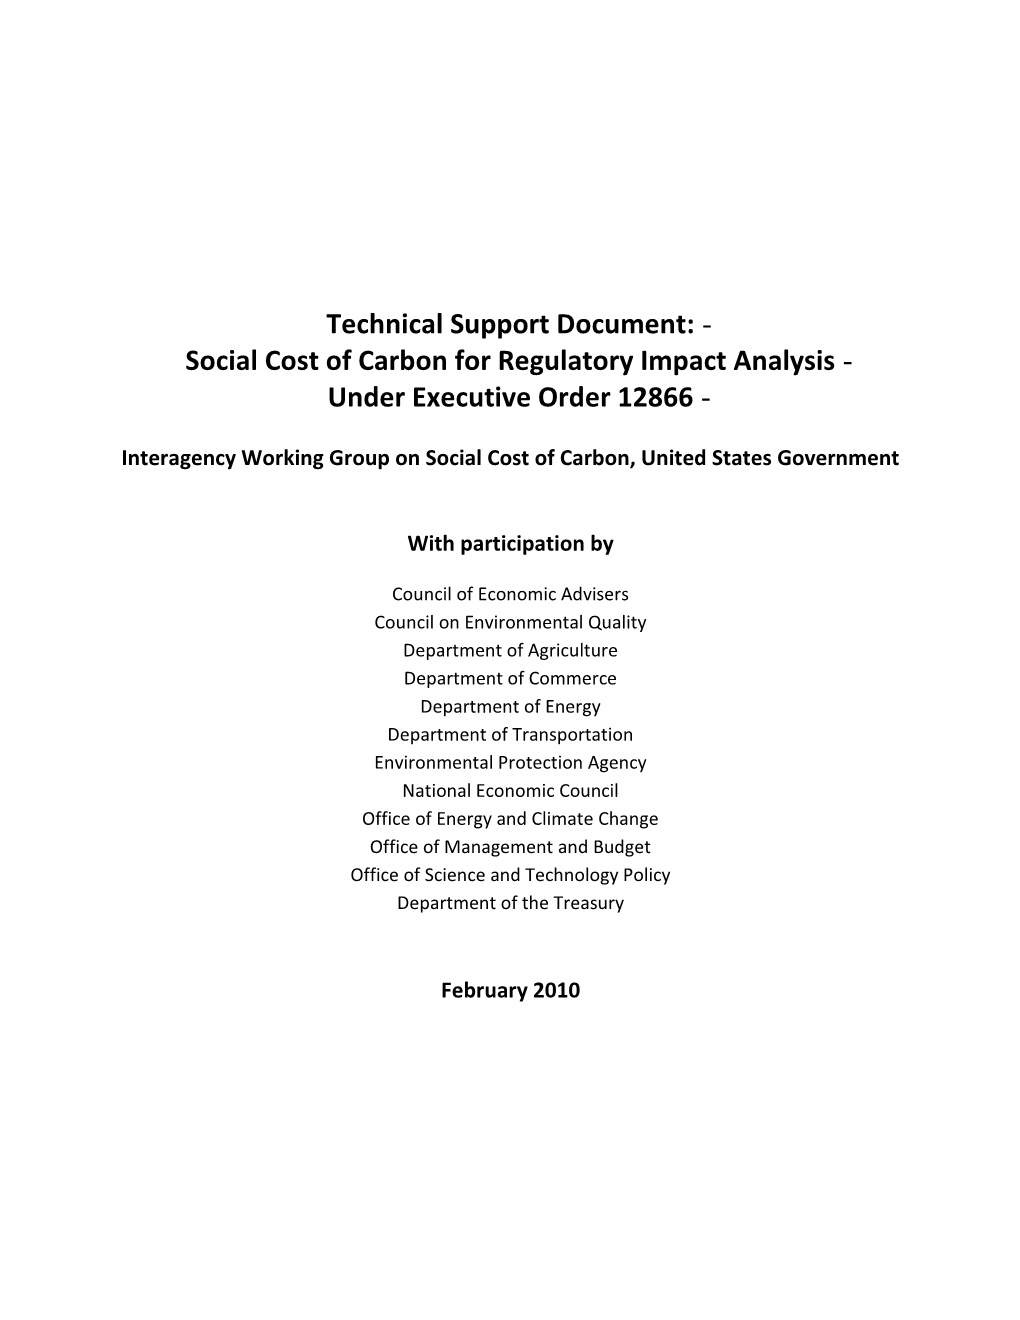 Social Cost of Carbon for Regulatory Impact Analysis Under Executive